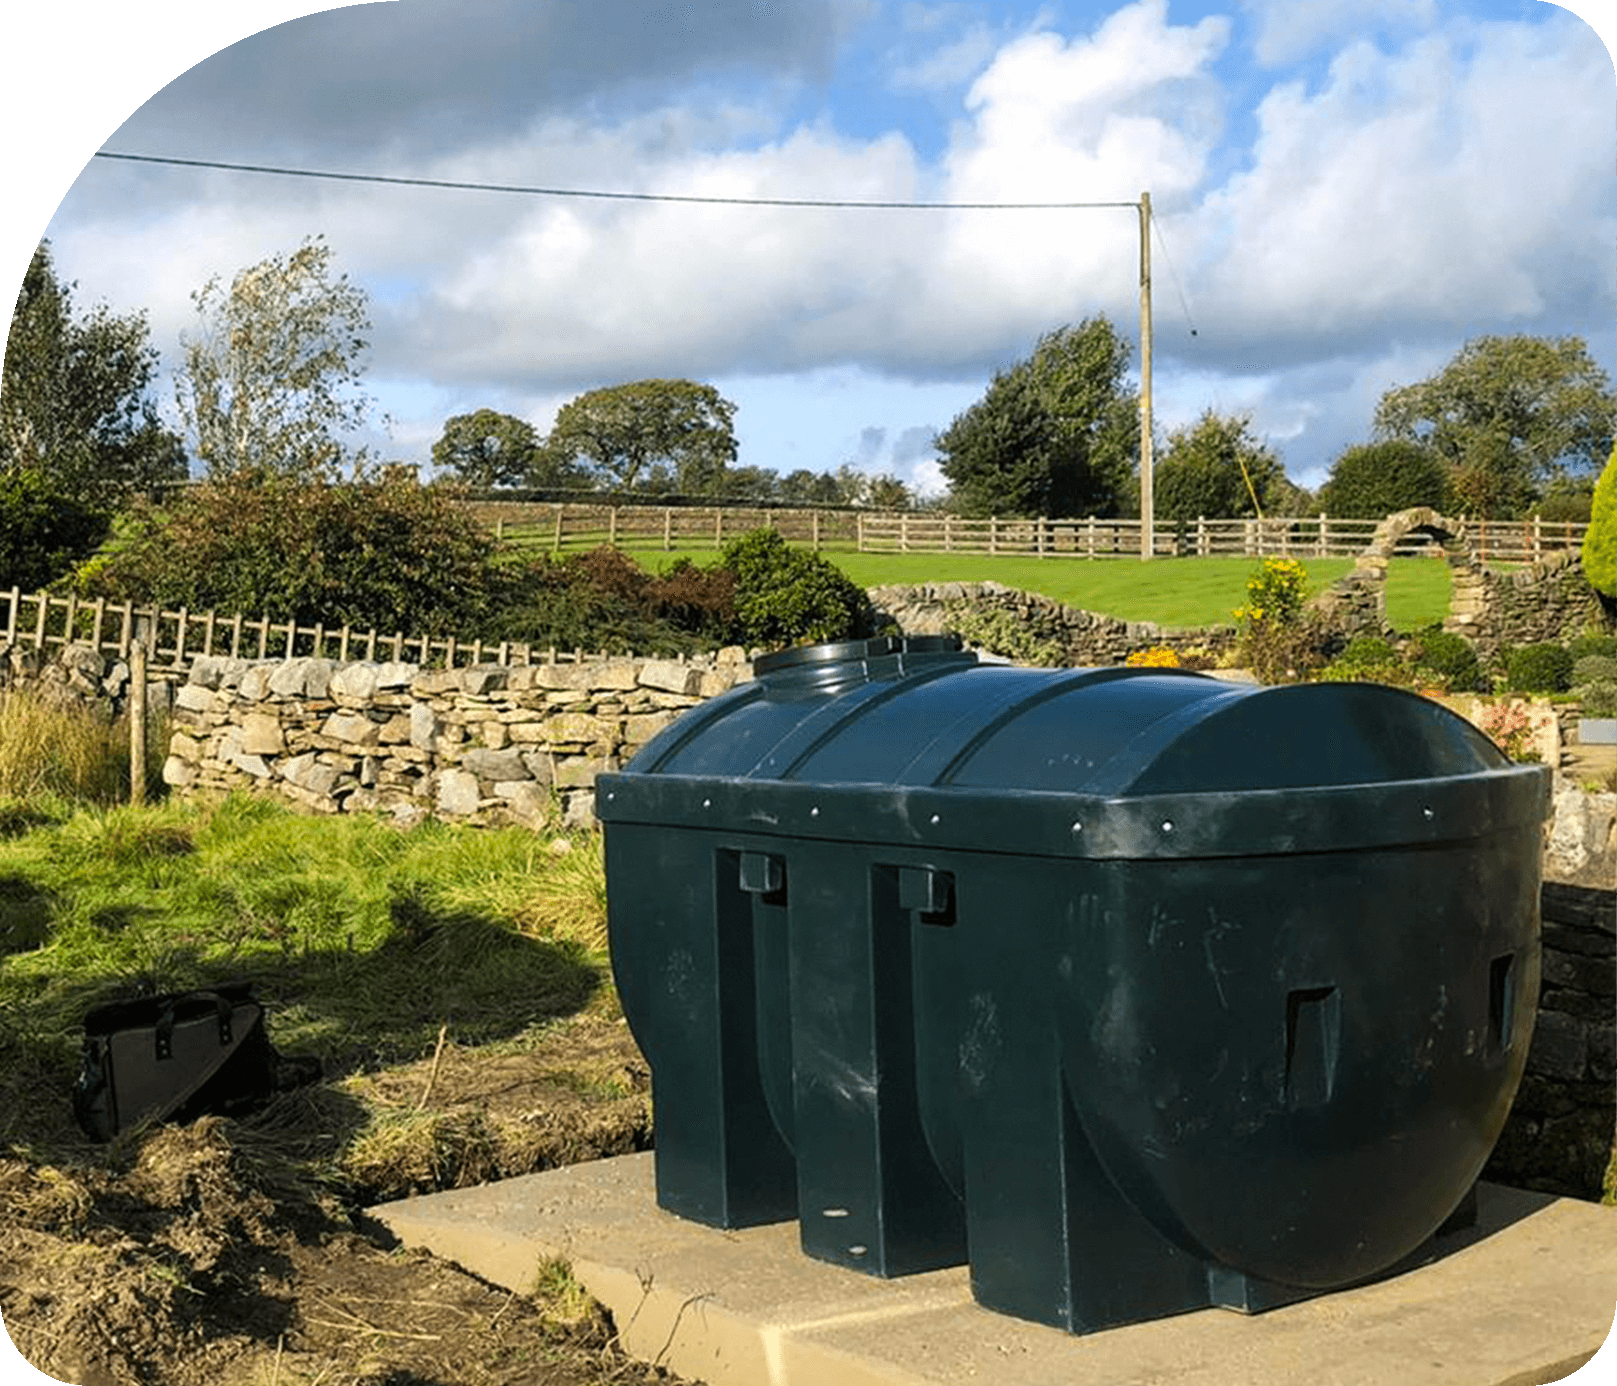 image of a heating oil tank on a sturdy platform